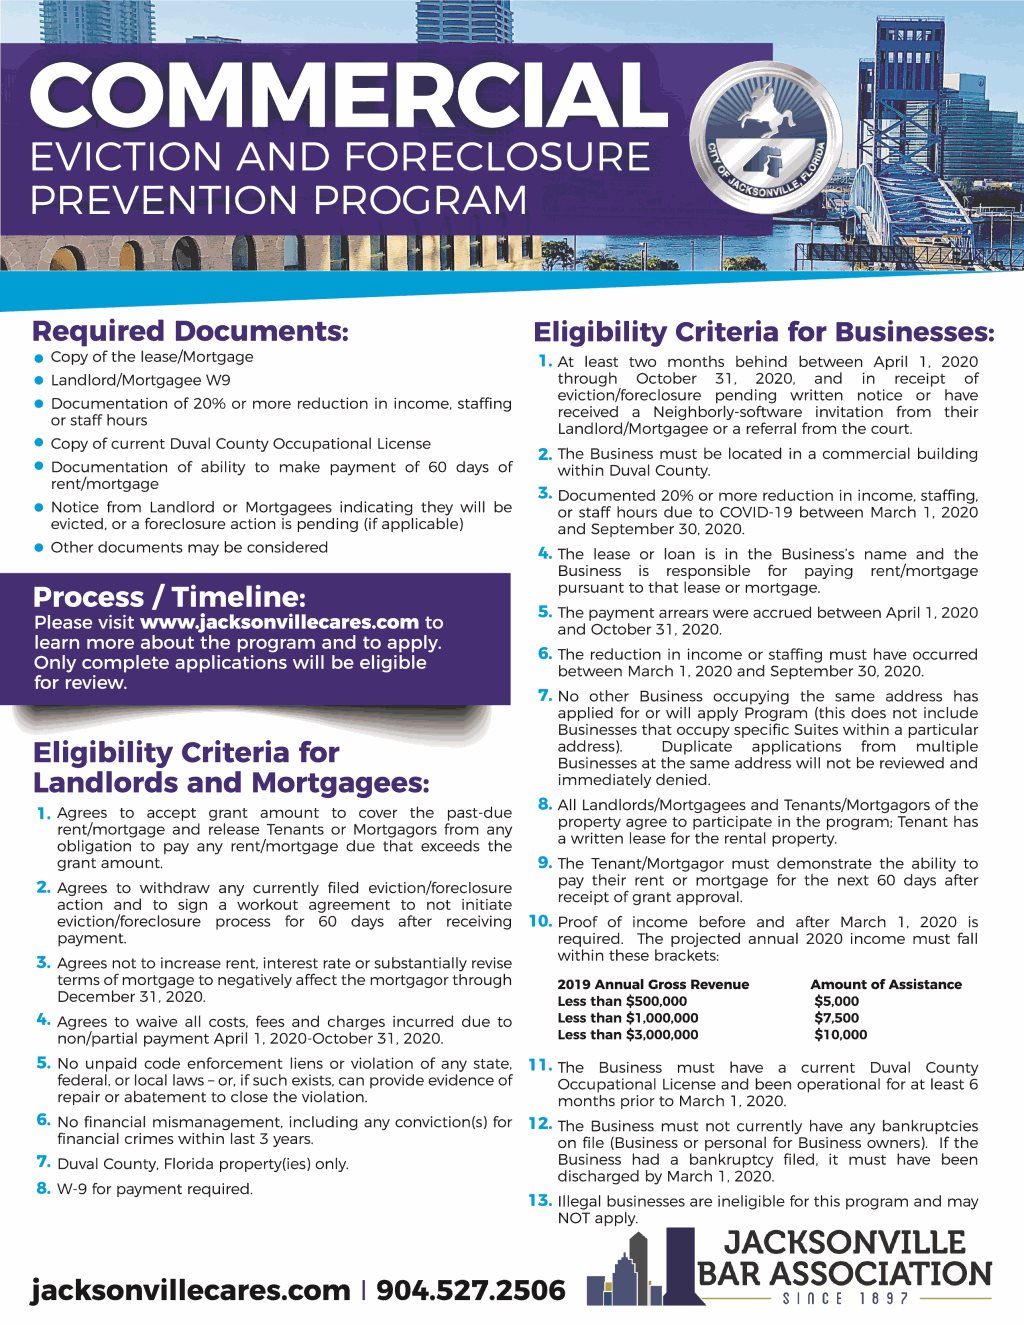 JBA Eviction and Foreclosure Commerical Flyer